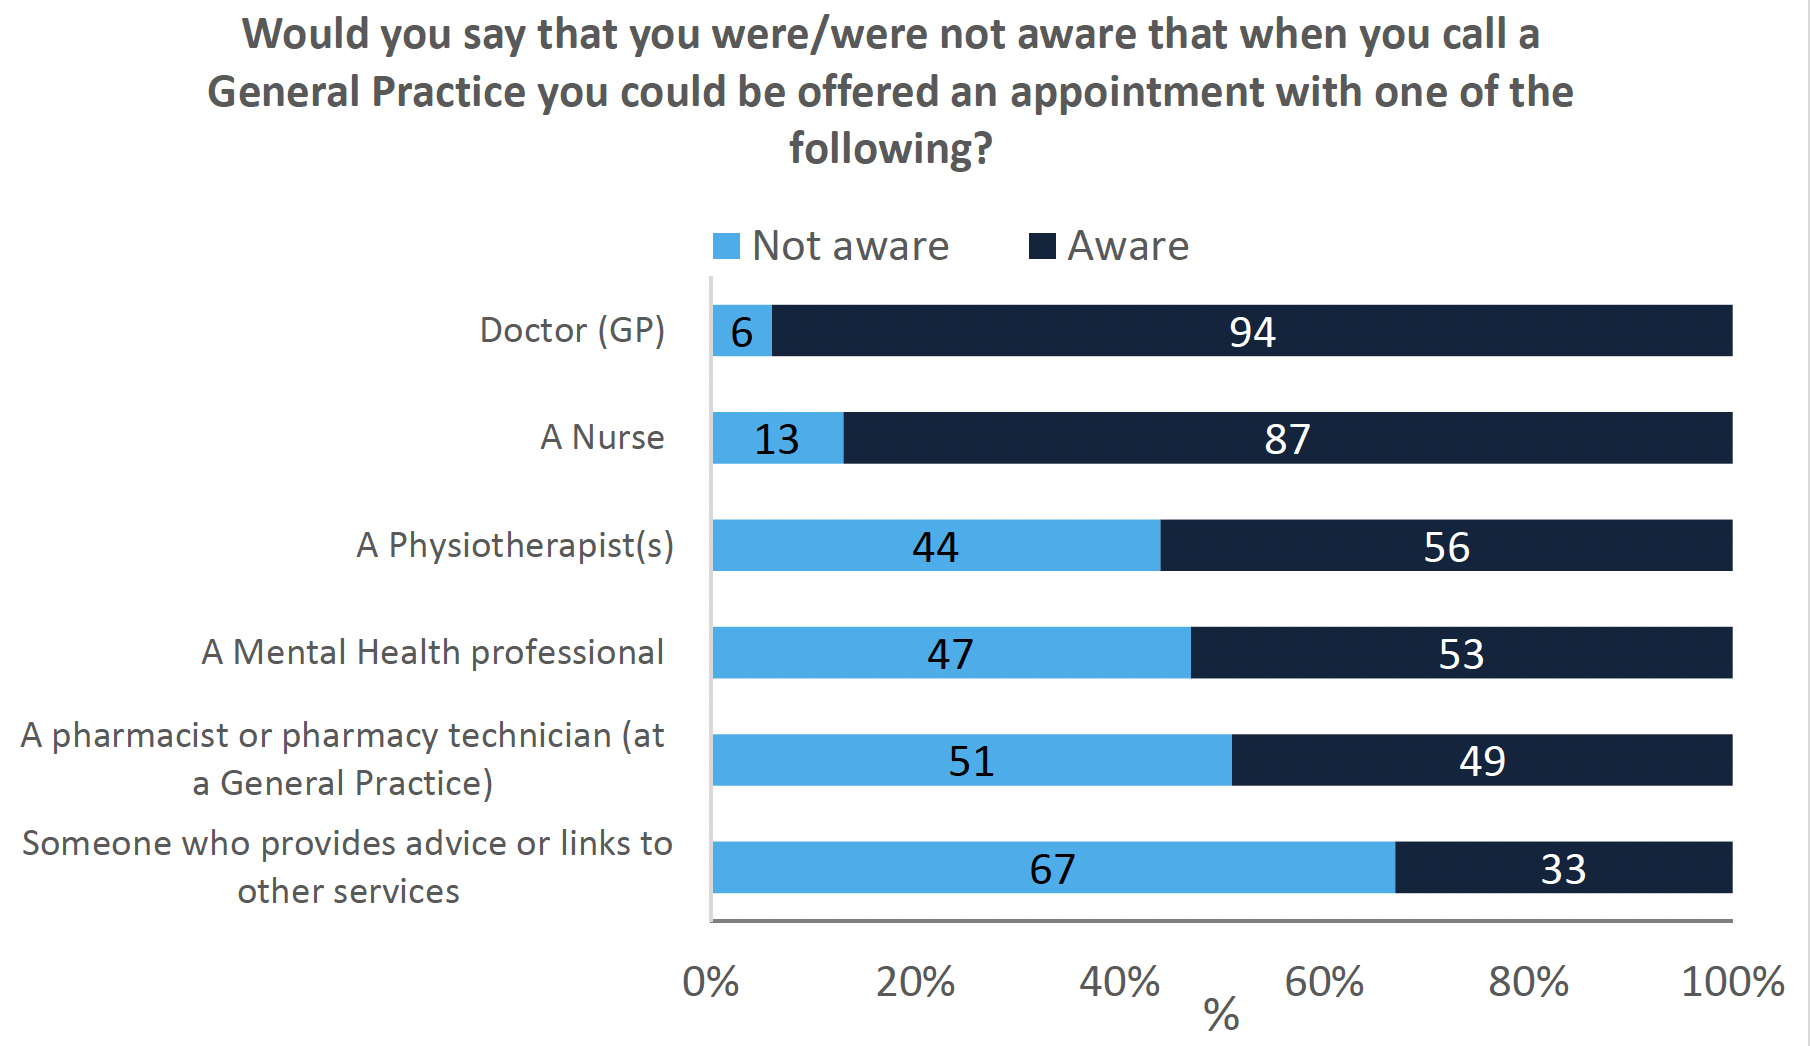 Horizontal stacked bar graph showing awareness of appointment types in general practice
A stacked bar graph that shows how aware respondents were of the type of appointments they could be offered when calling a General Practice. The vast majority (94%) were aware that they could be offered a Doctor (GP) appointment and participants were least aware they could be offered an appointment by Someone who provides advice or links to other services (67%).